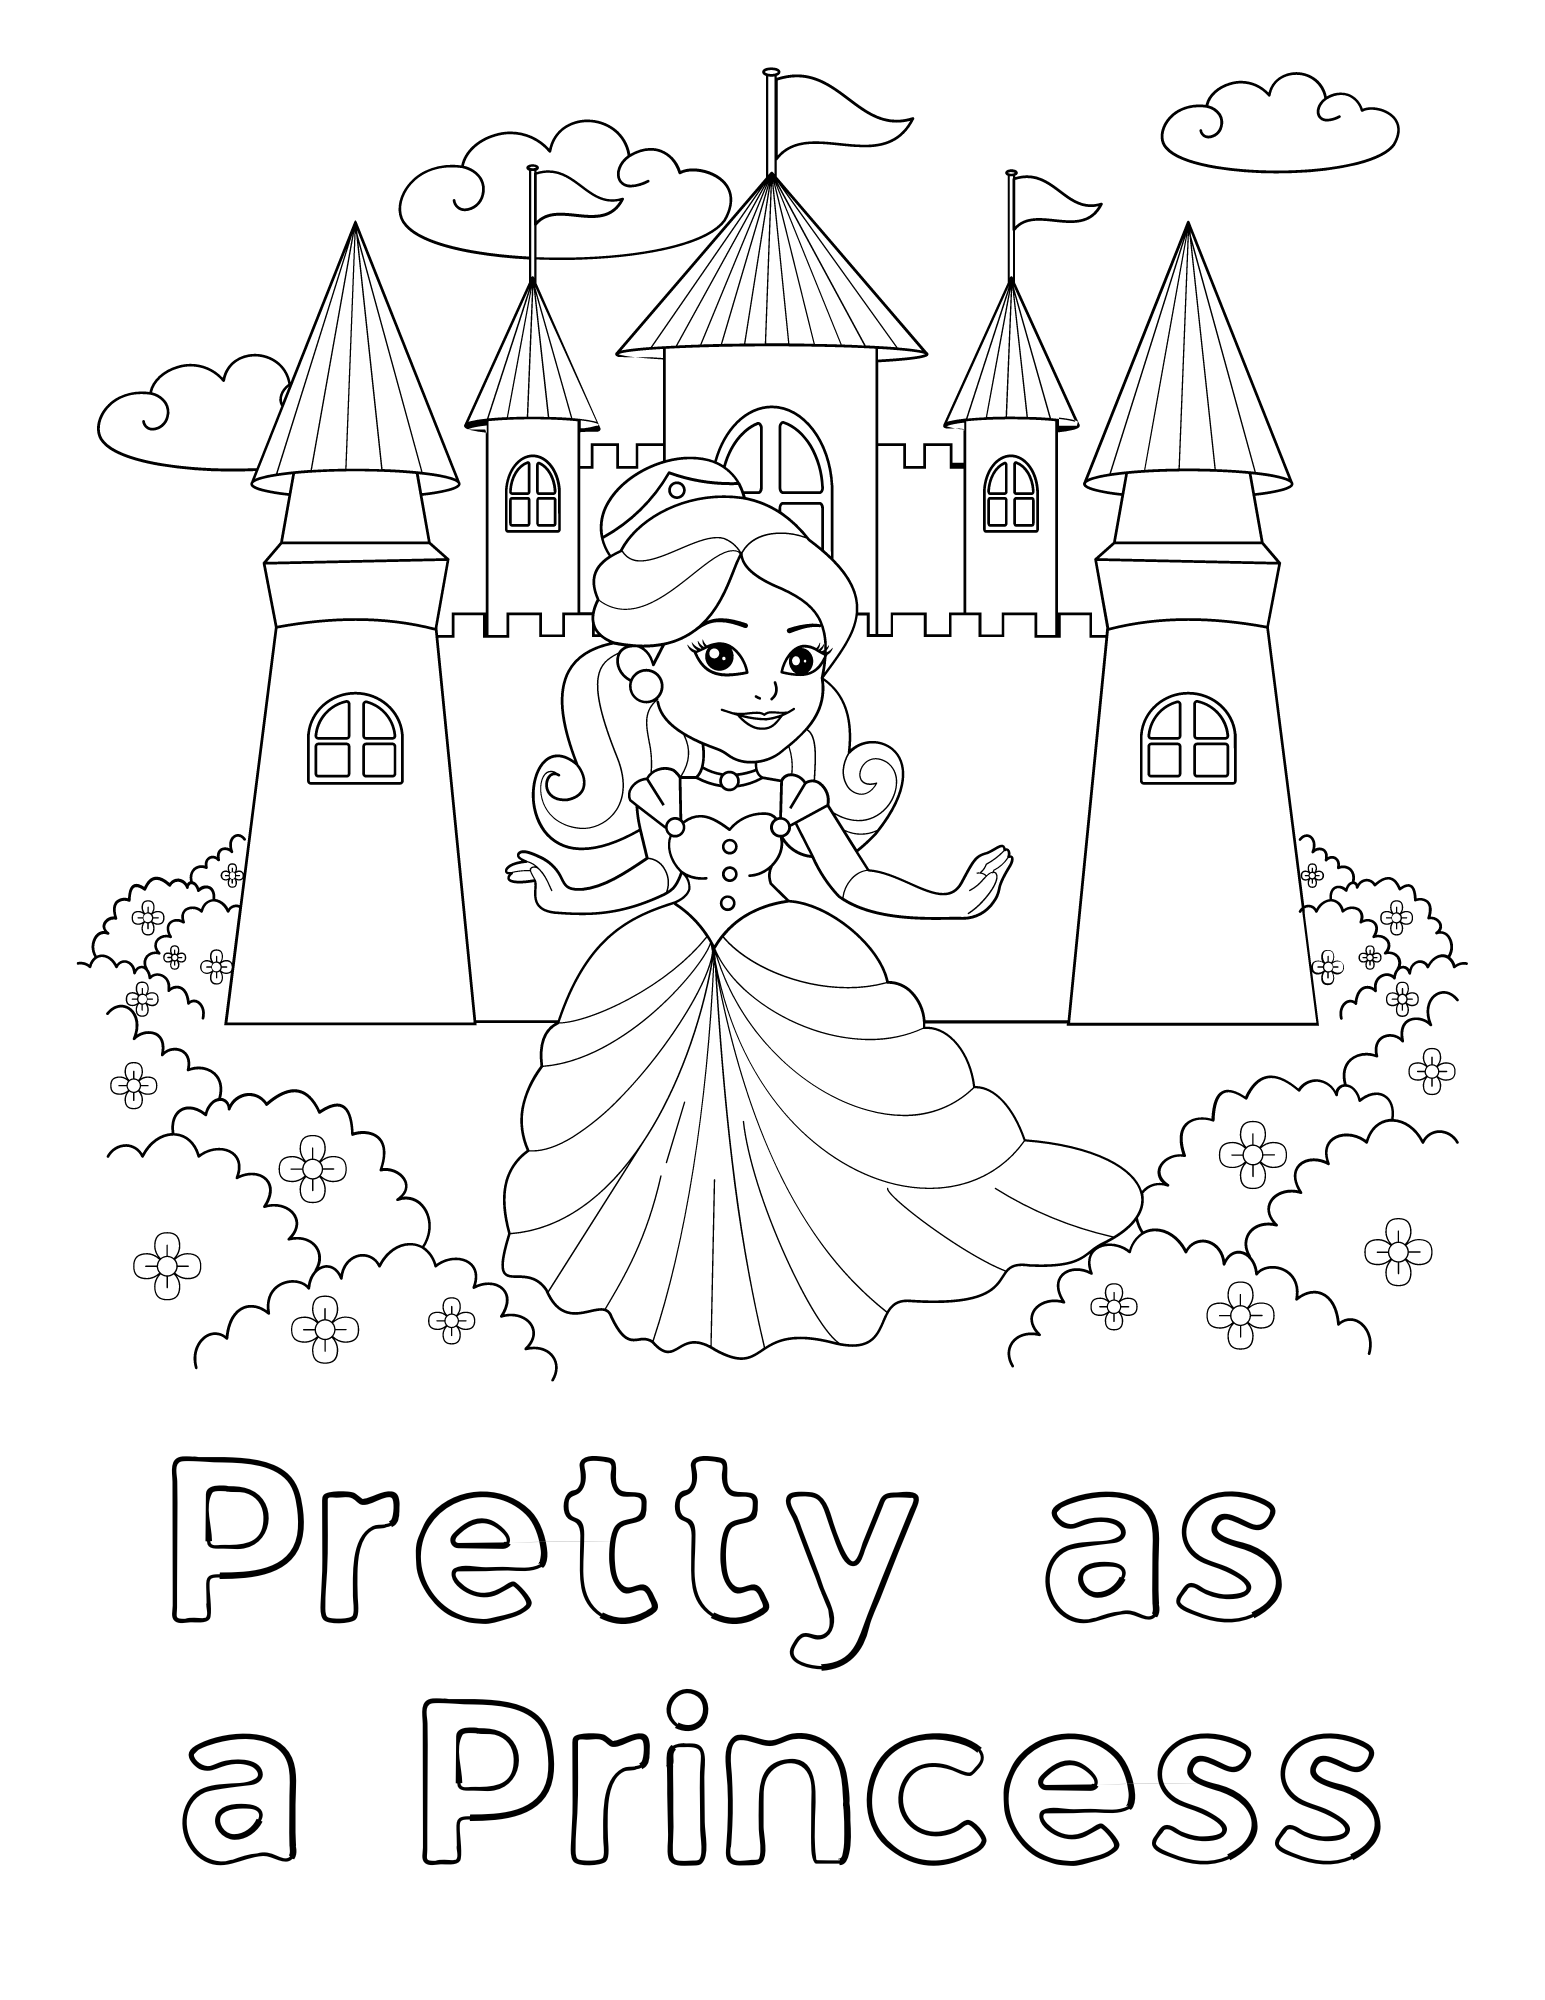 Free princess coloring pages for kids and adults